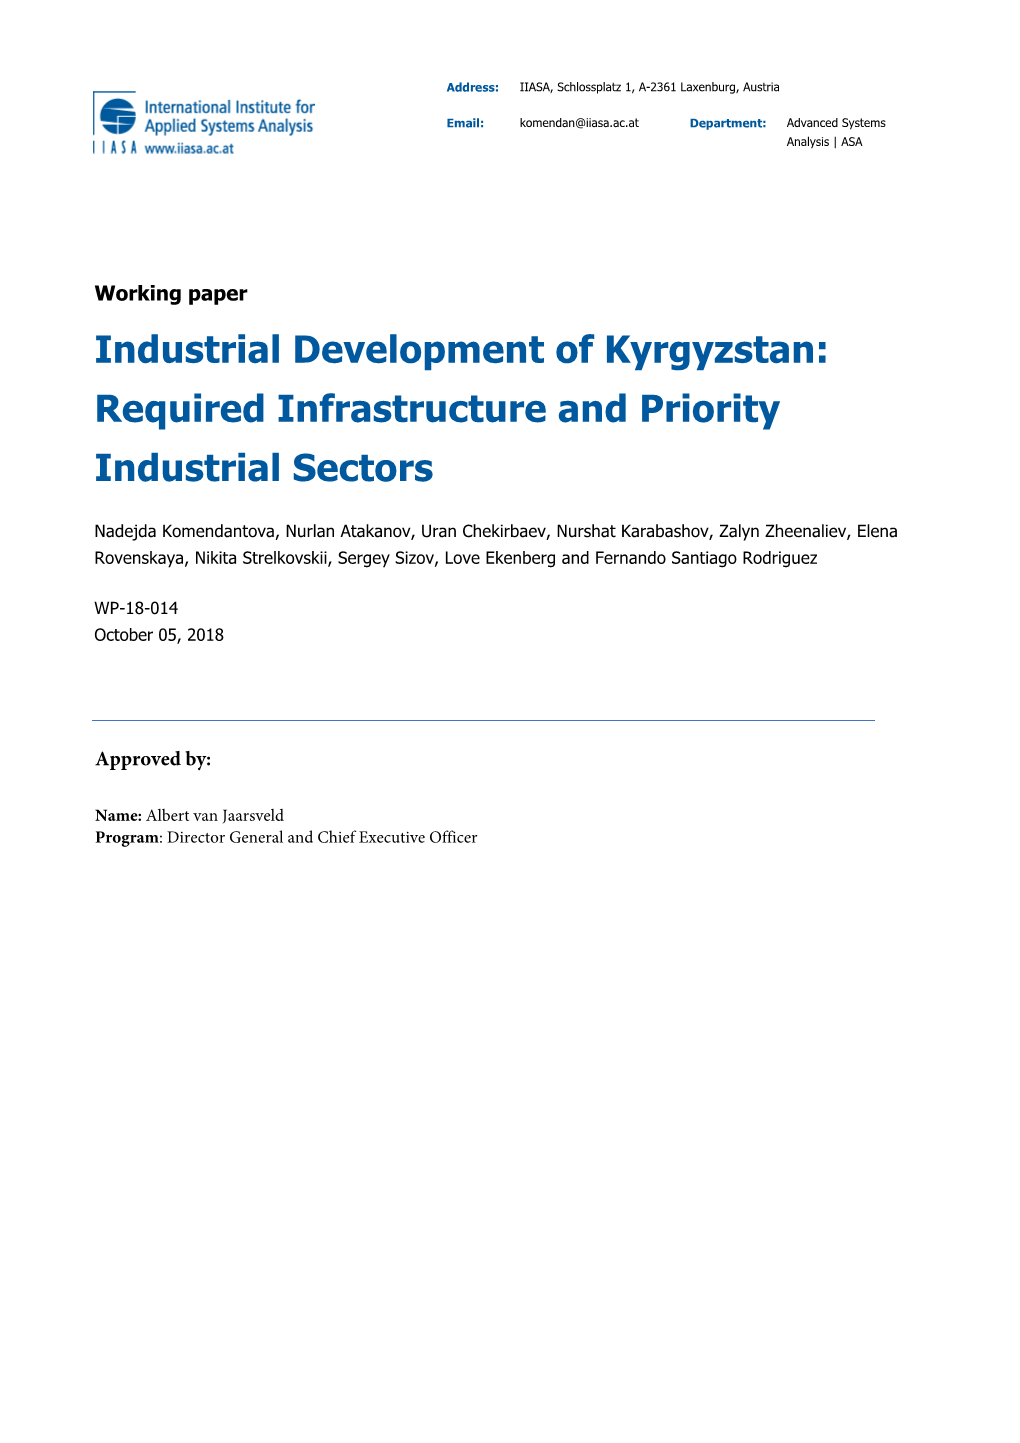 Industrial Development of Kyrgyzstan: Required Infrastructure and Priority Industrial Sectors